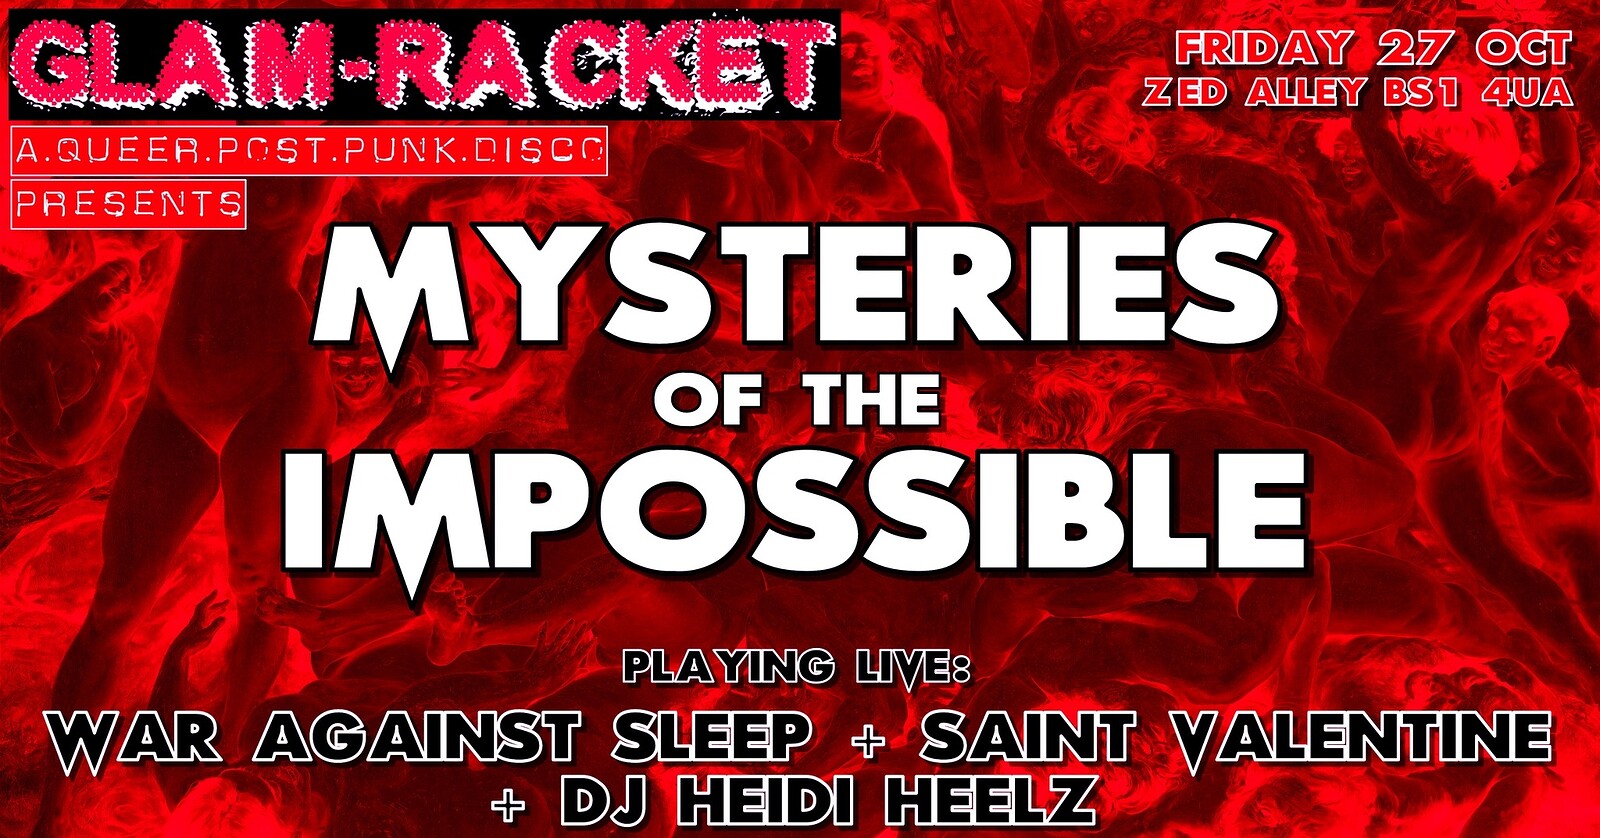 MYSTERIES OF THE IMPOSSIBLE at Zed Alley